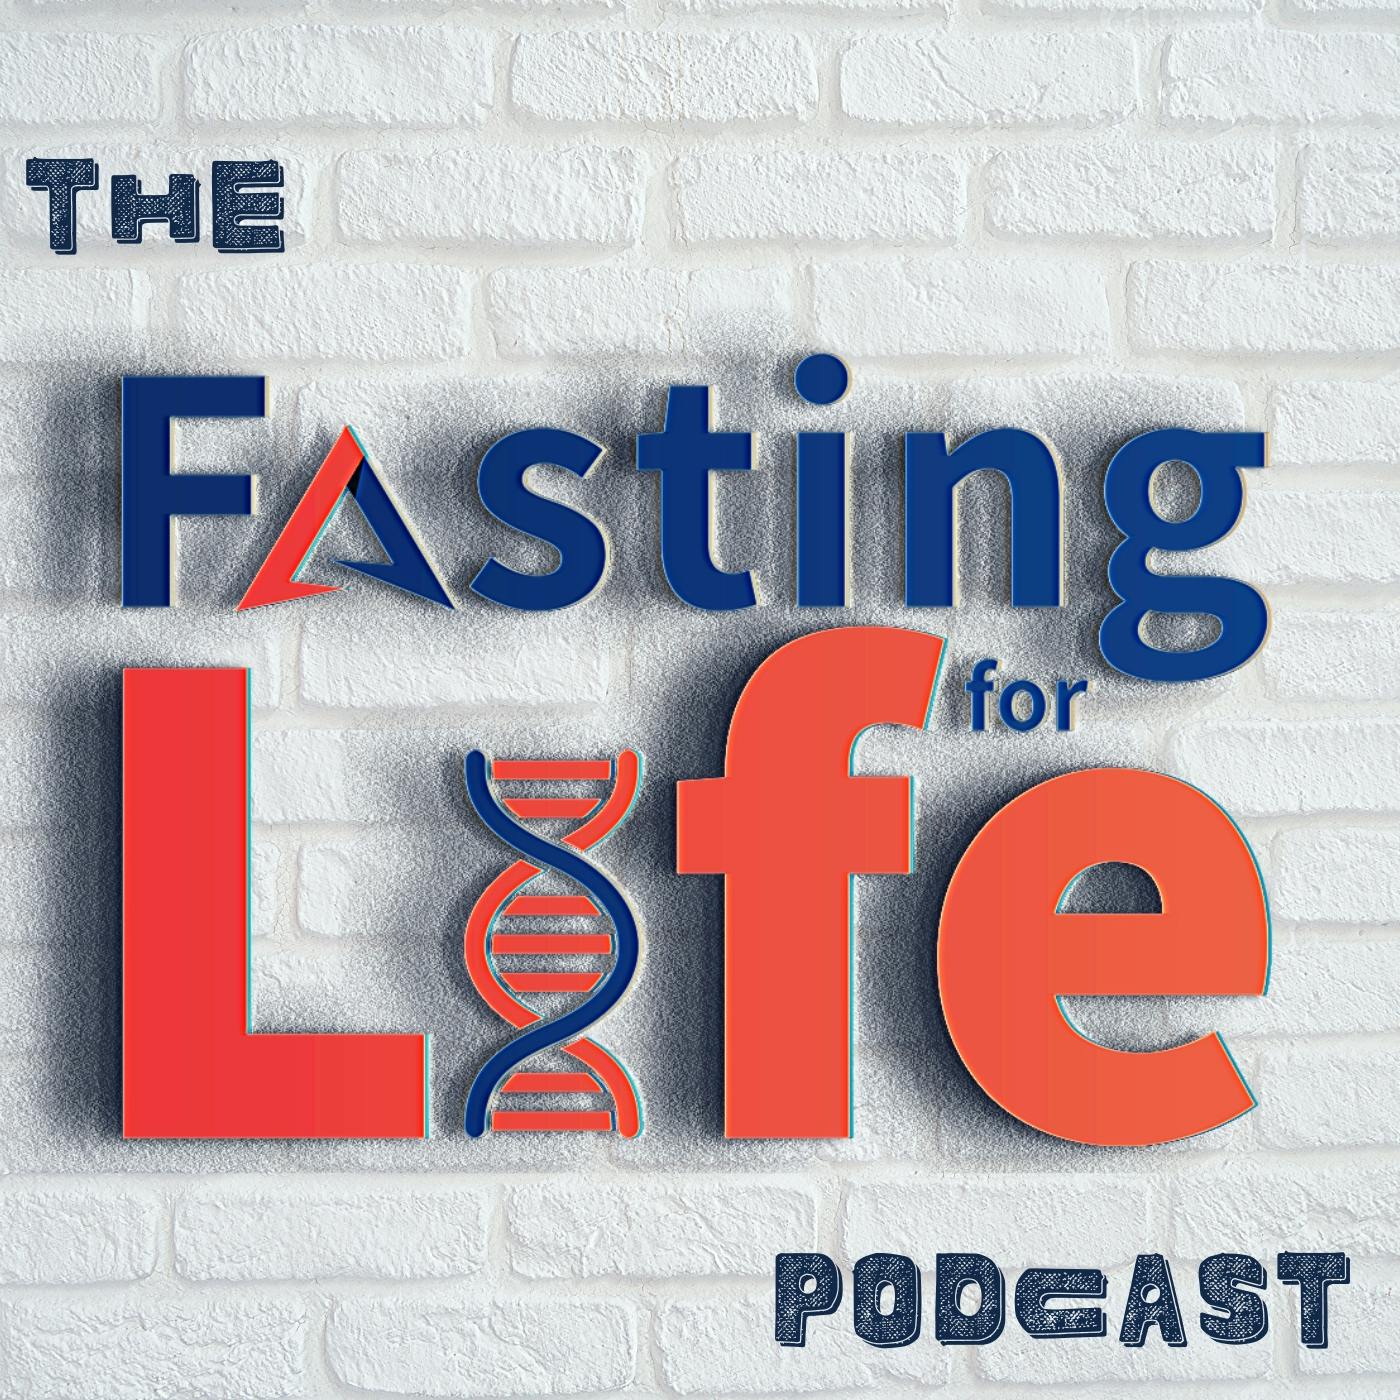 Ep. 18 - Getting Started Fasting, First Steps | Reverse Diabetes, High Risk Fasting, Take Back Your Health | Decide to Start Fasting Today, Download Your Intermittent Fasting Plan